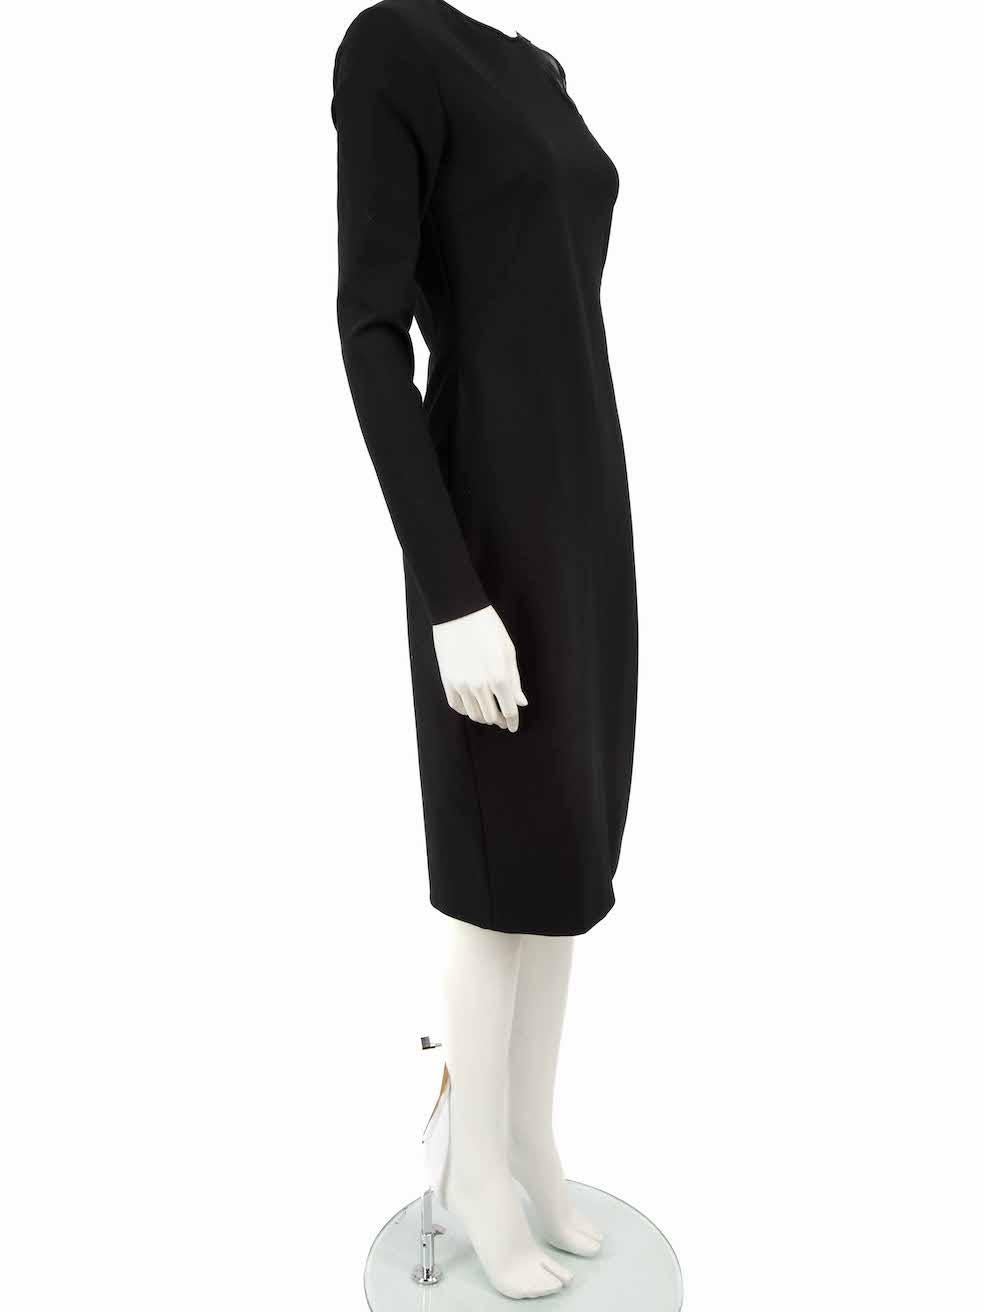 CONDITION is Very good. Minimal wear to dress is evident. Minimal wear to the brand label at the lining with one side having become detached and there are two small plucks to the bust on this used Stella McCartney designer resale item.
 
 Details
